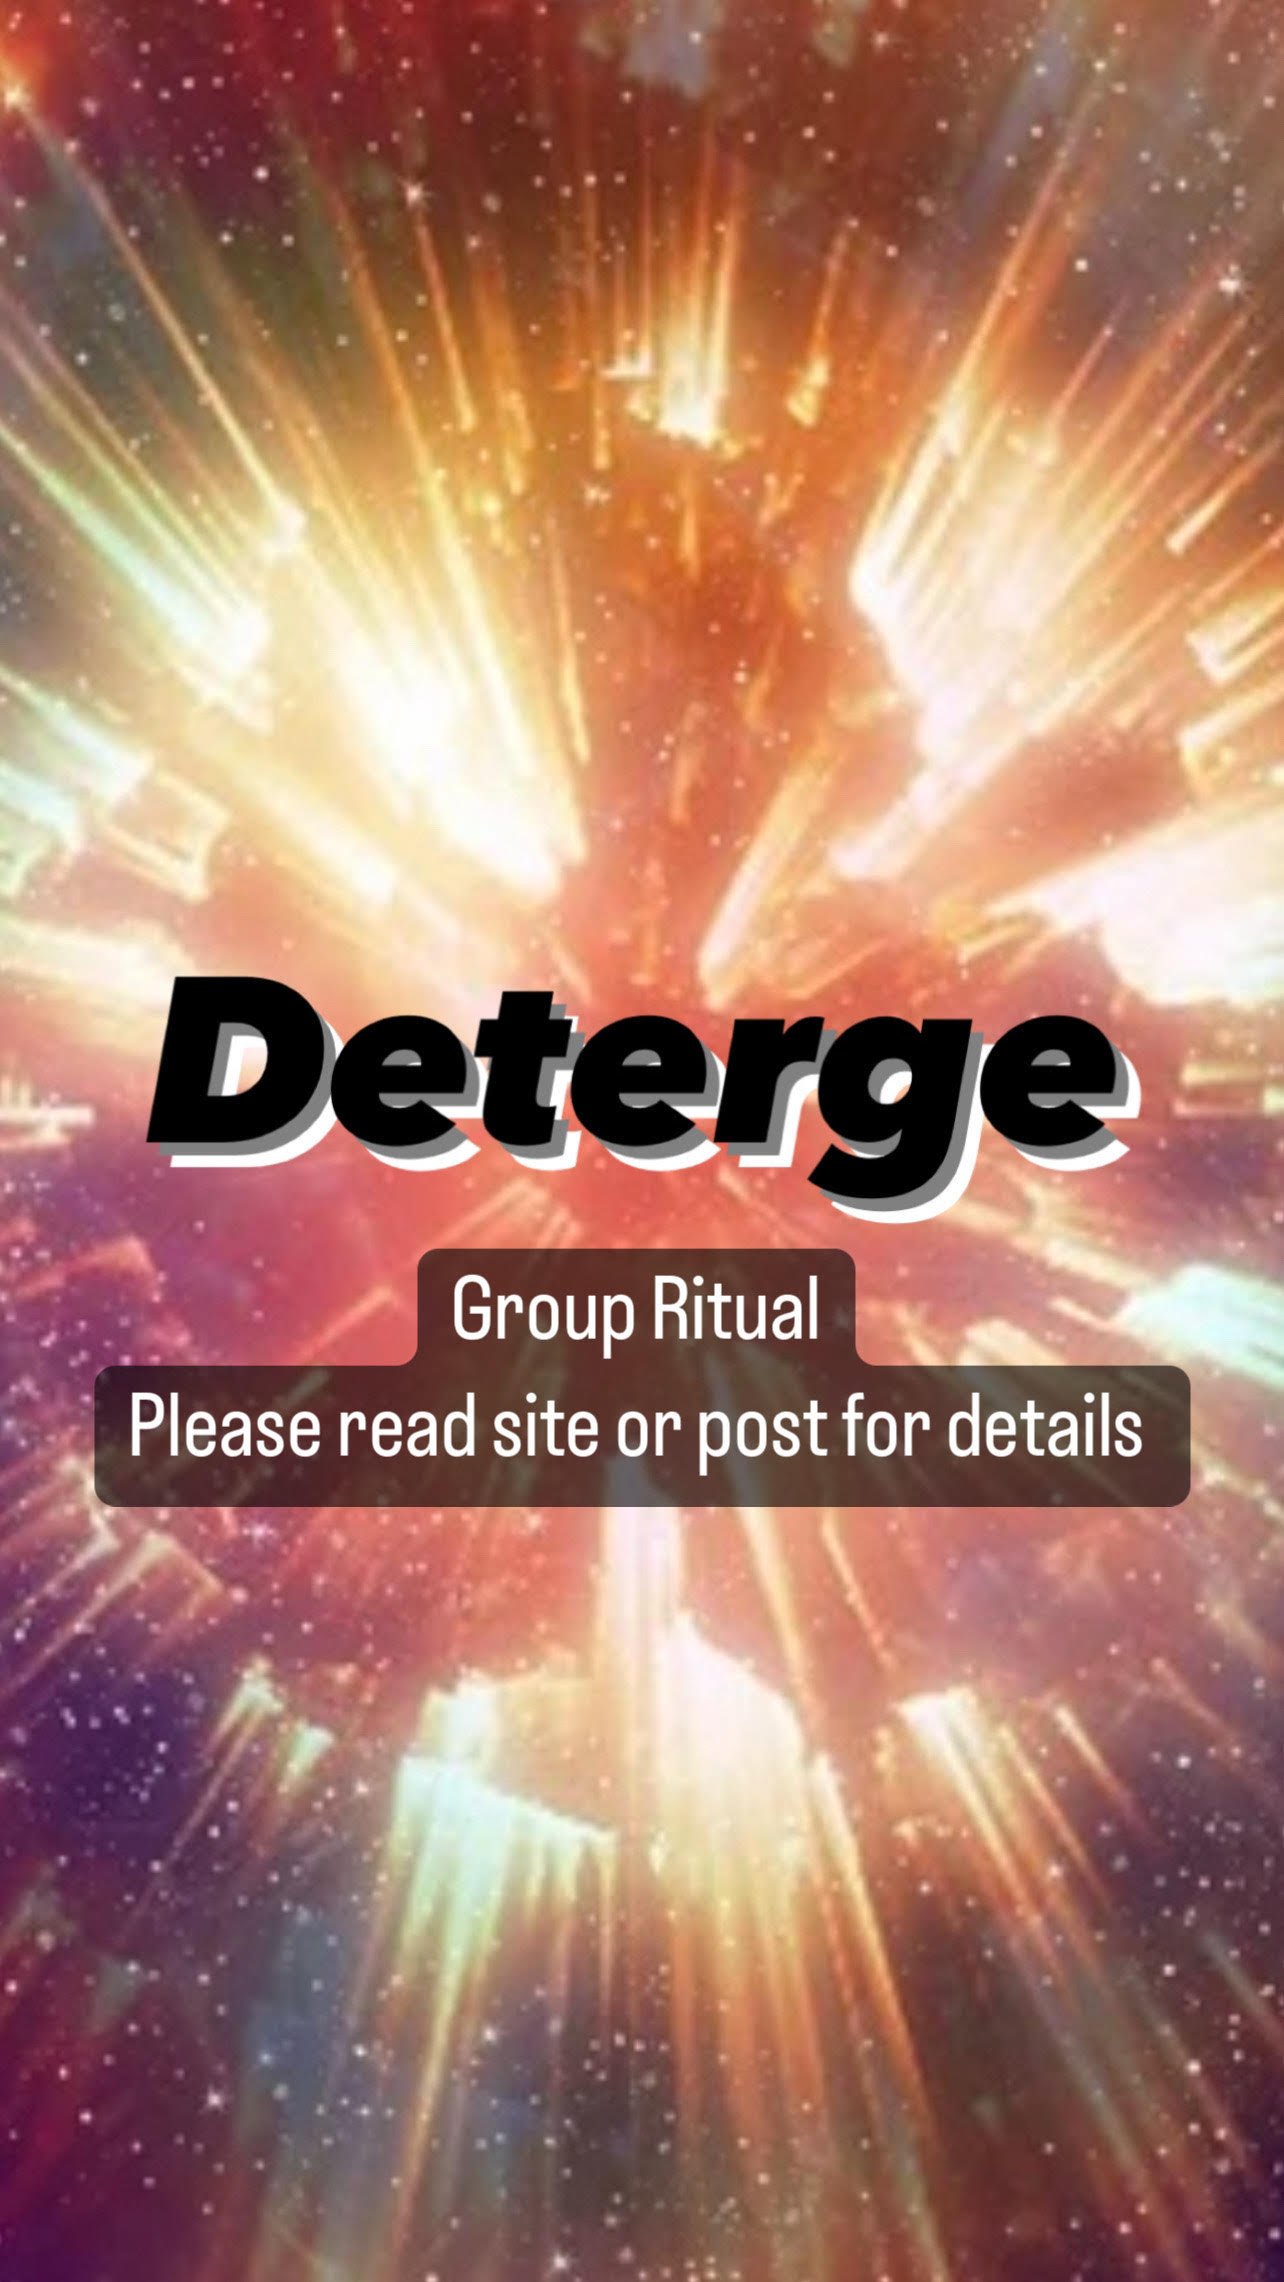 Image of Deterge Group Ritual Monday Sept 25th